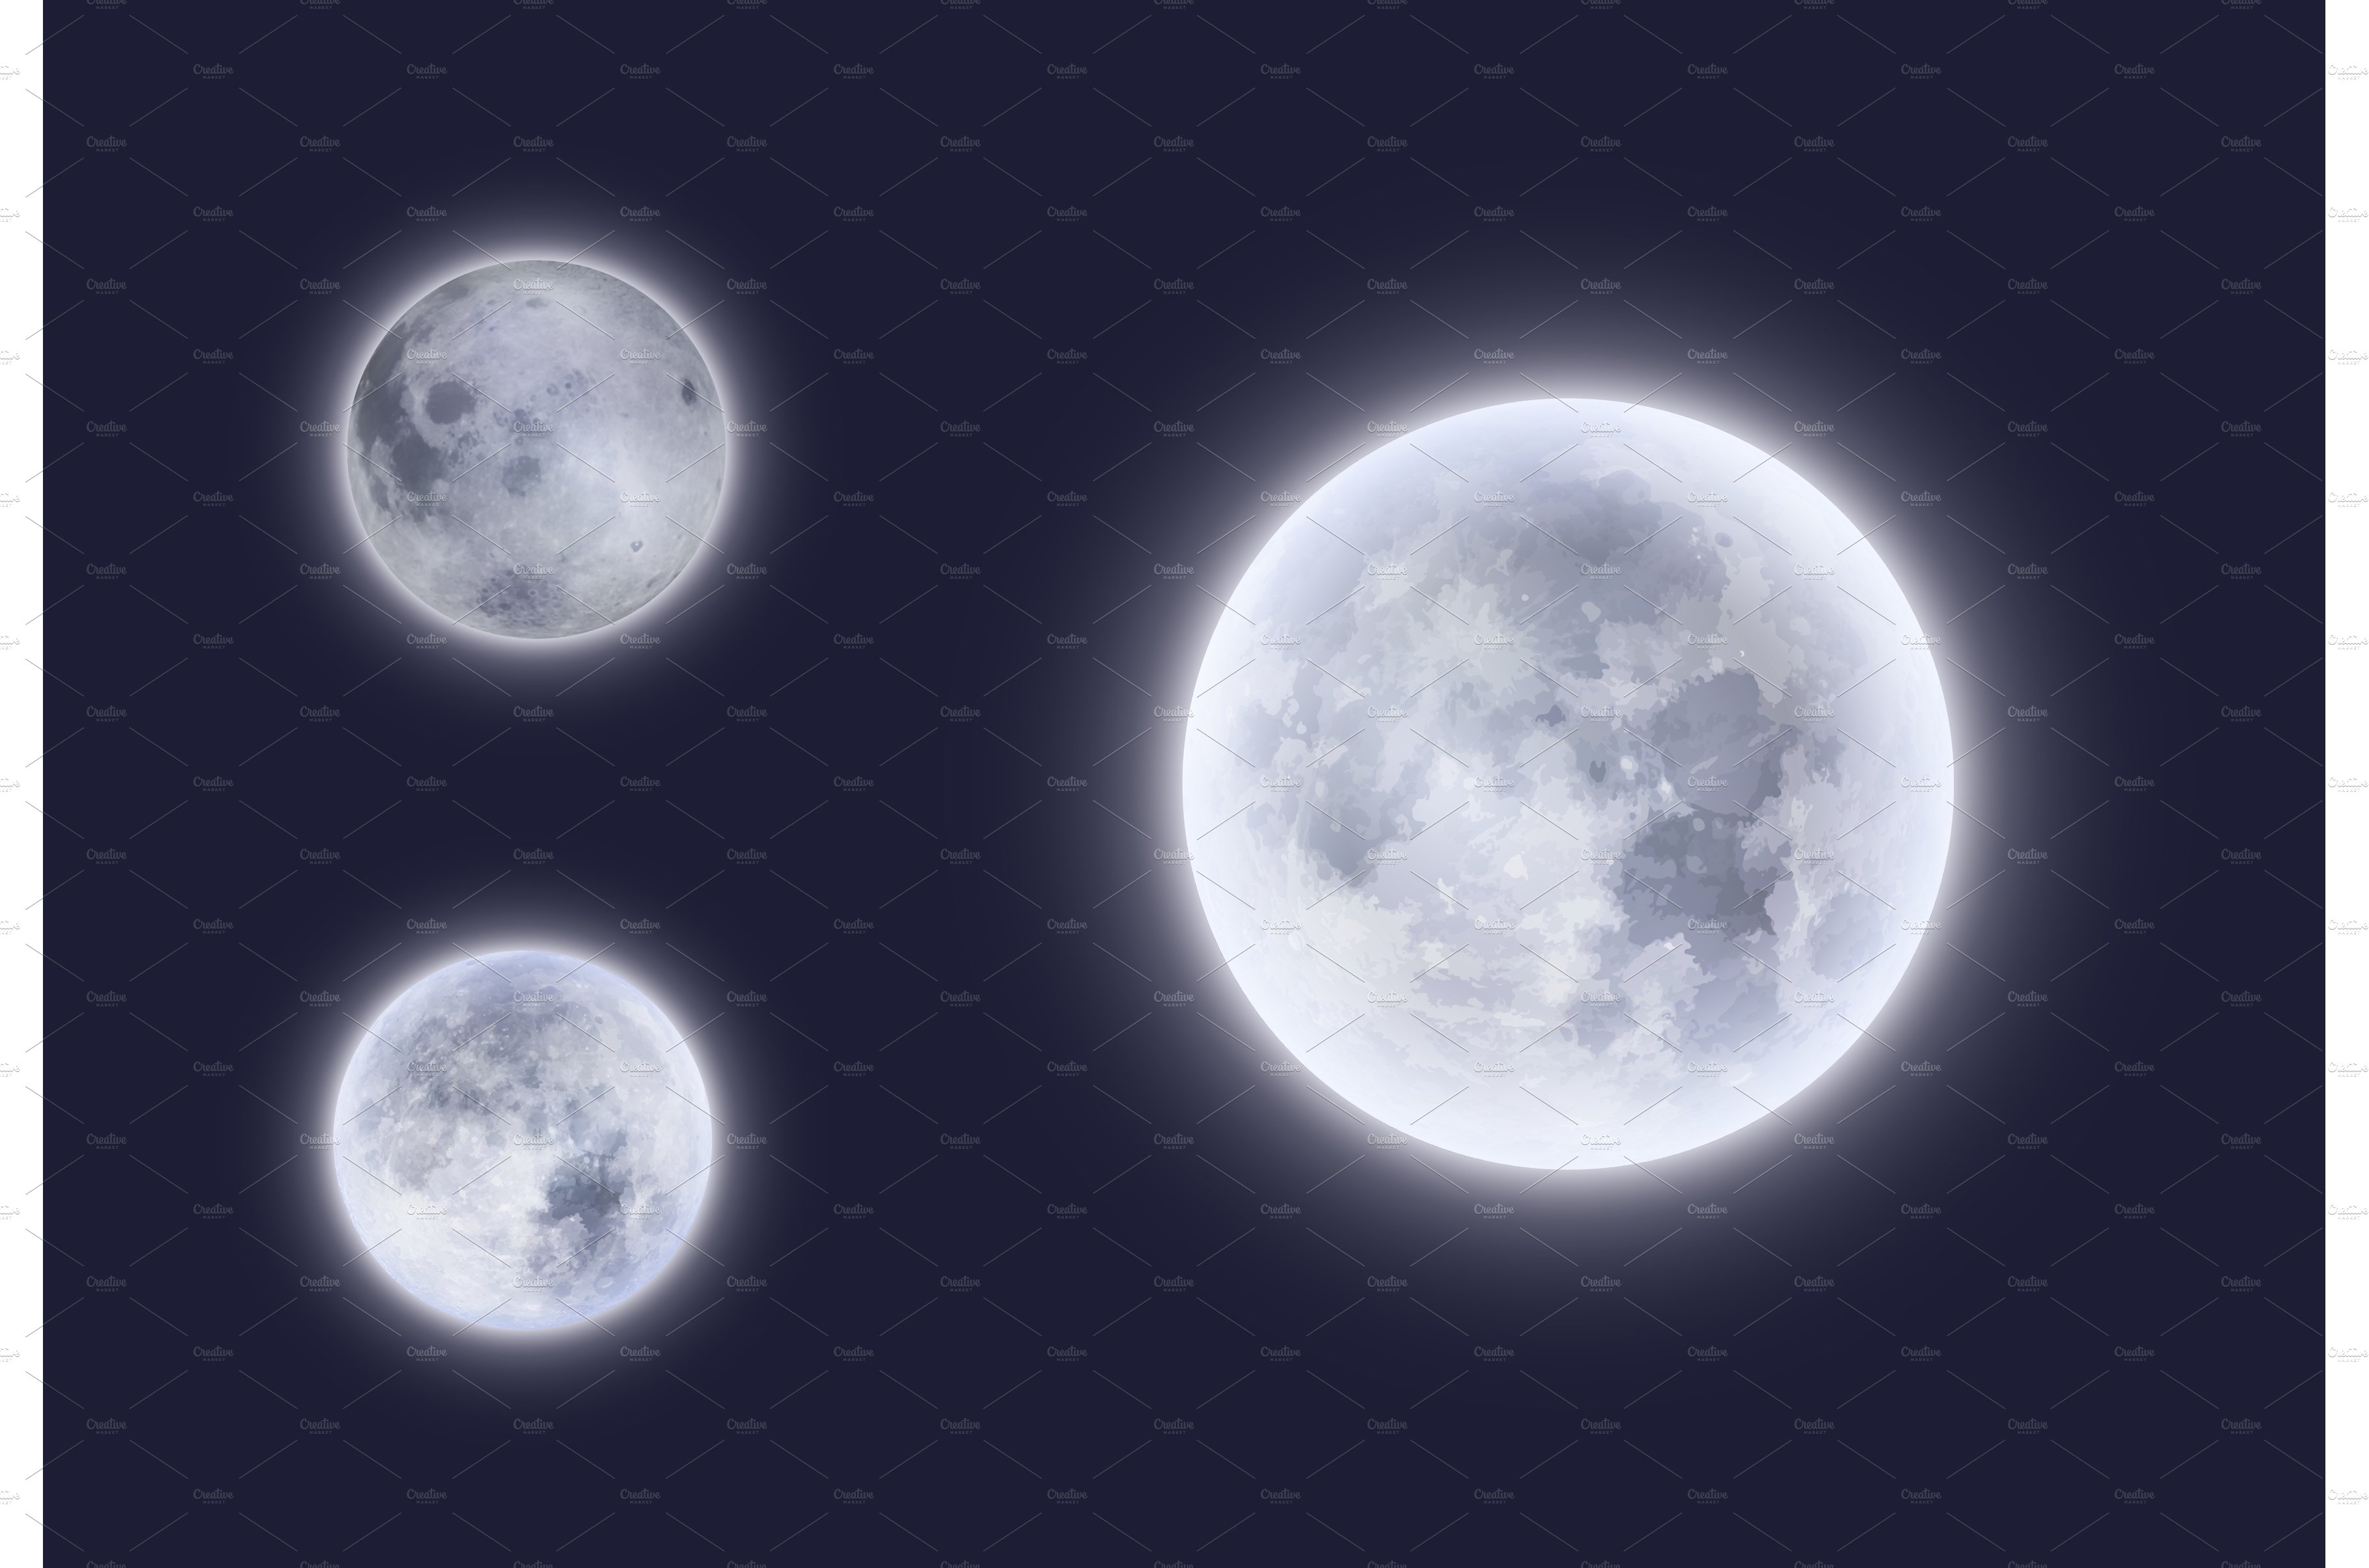 Full moon in night sky cover image.